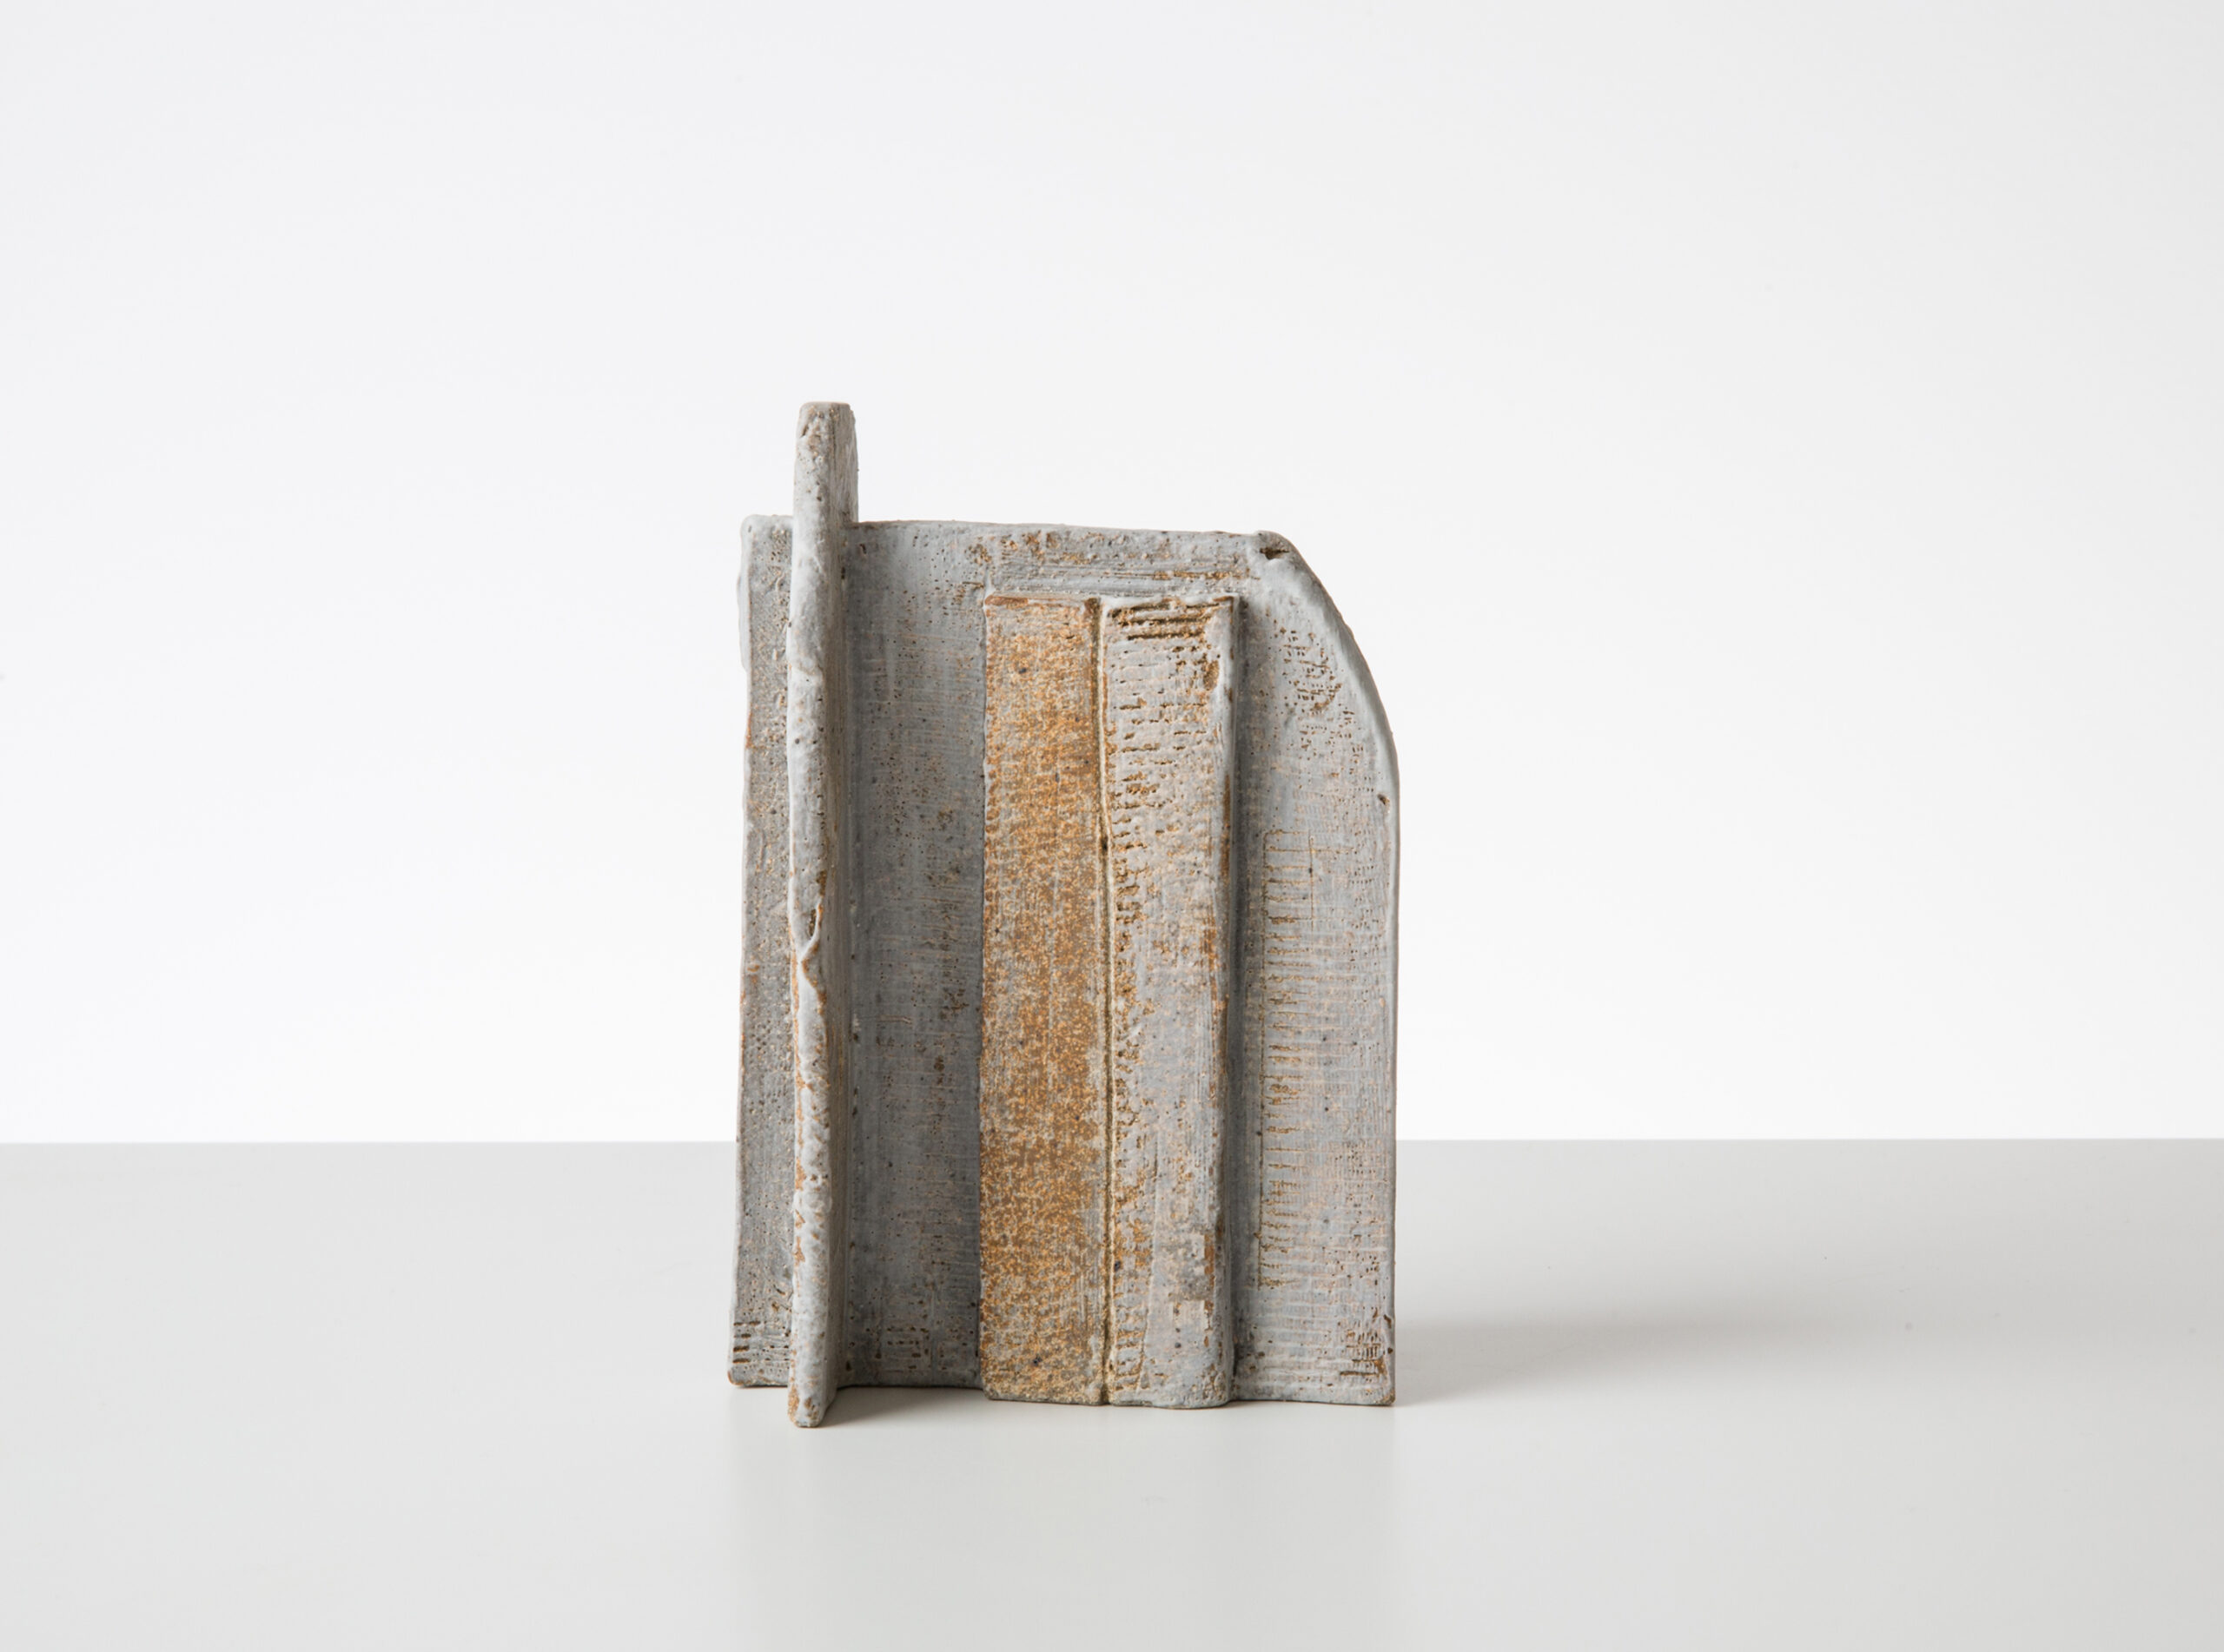 COMPOSITION #9, 2015 stoneware and slip, 6 1/2 x 5 x 2 1/5 in